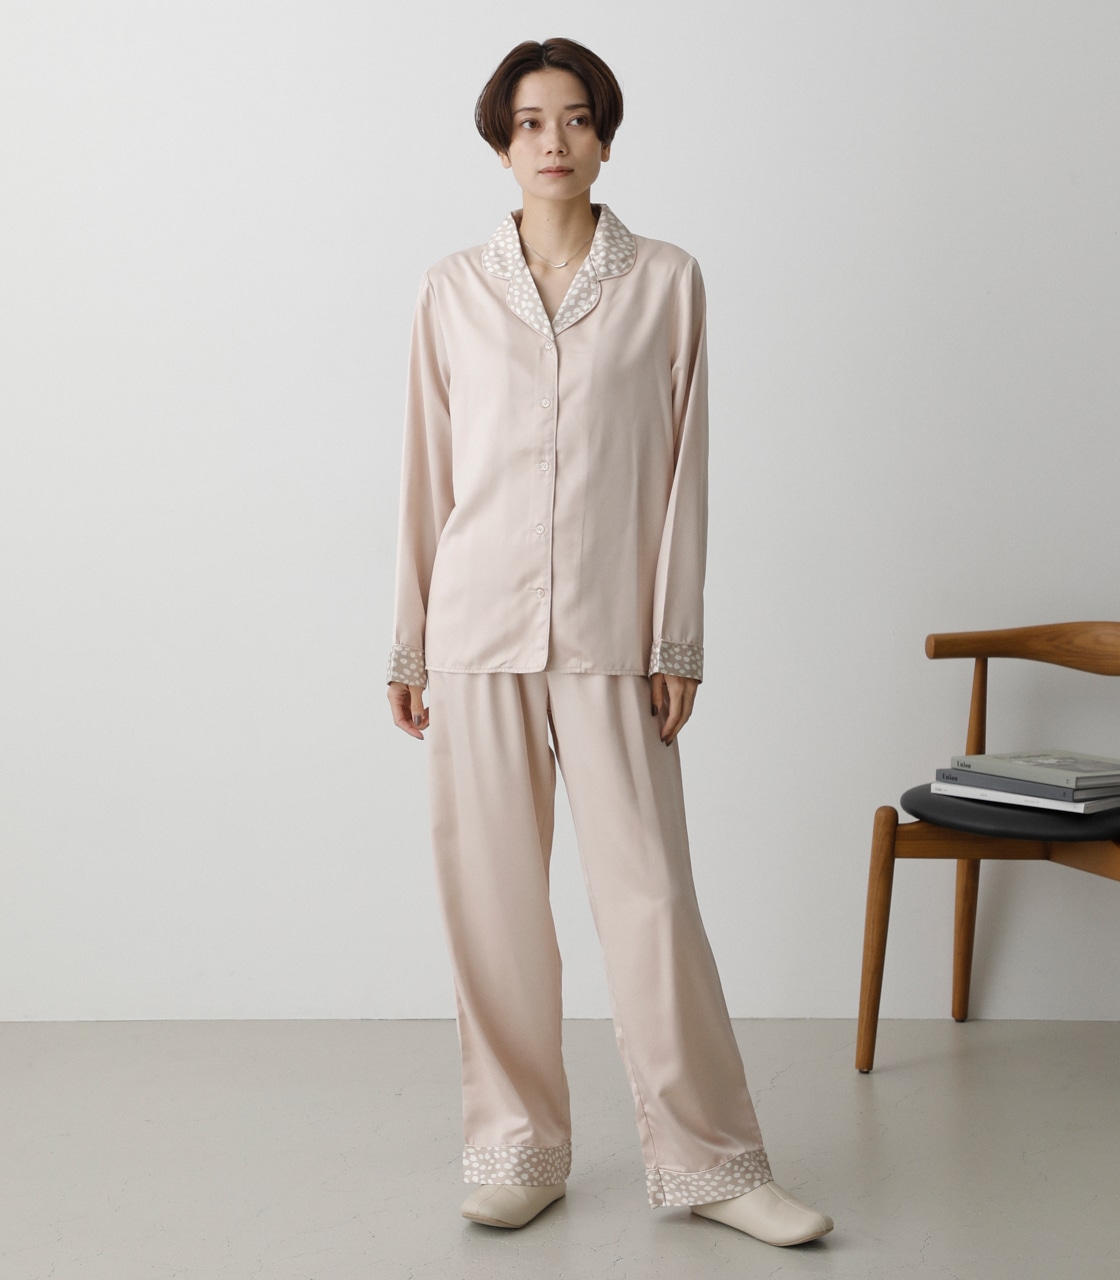 T/H SATIN PIPING PAJAMAS/T/Hサテンパイピングパジャマ 詳細画像 L/BEG 5